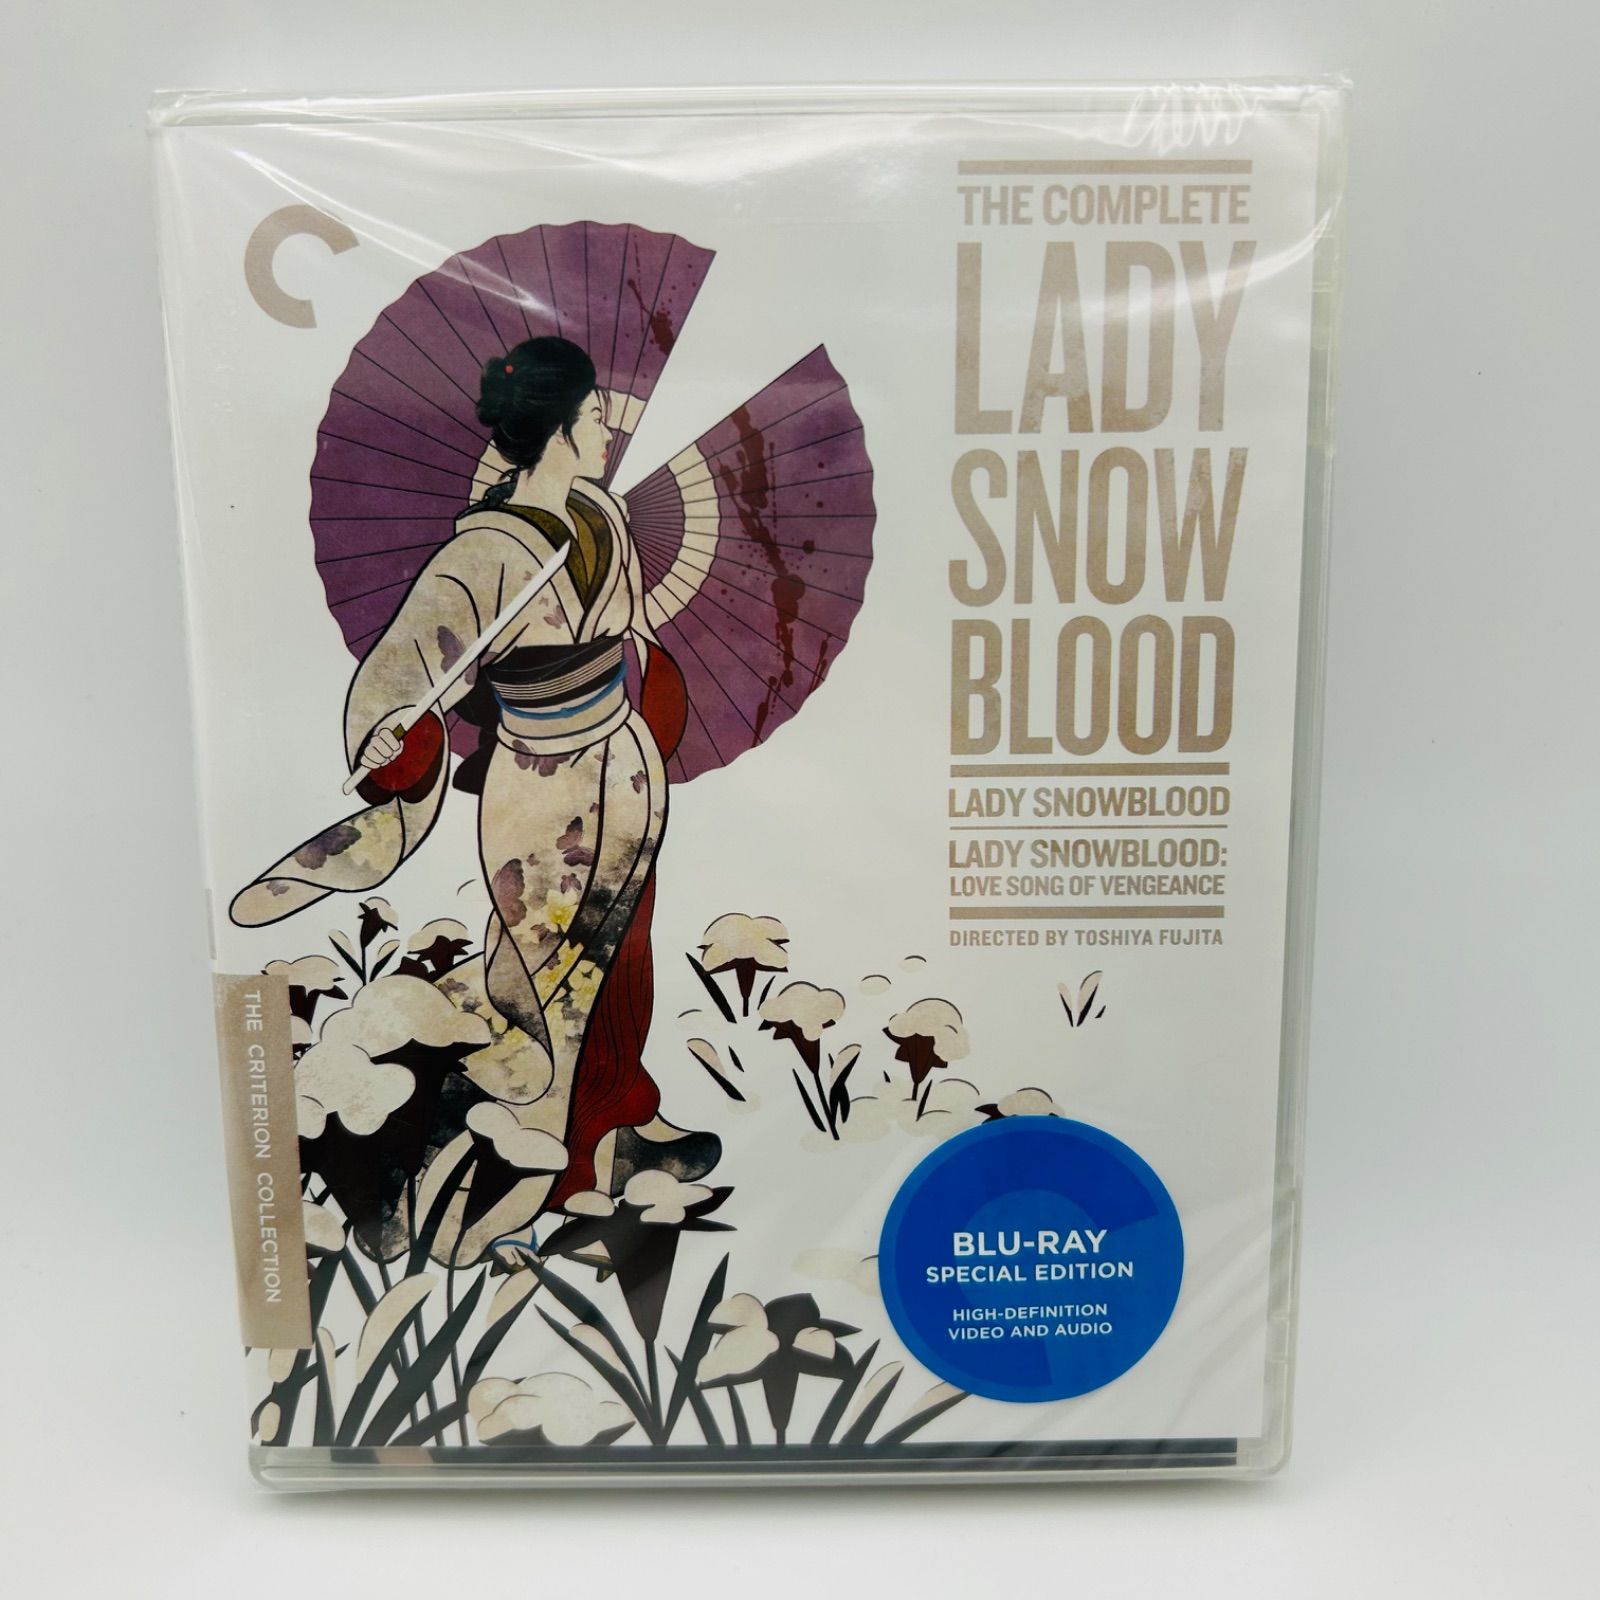 Complete　Criterion　Snowblood　[Blu-ray]　Lady　Collection:　メルカリ　[Import]　B316B